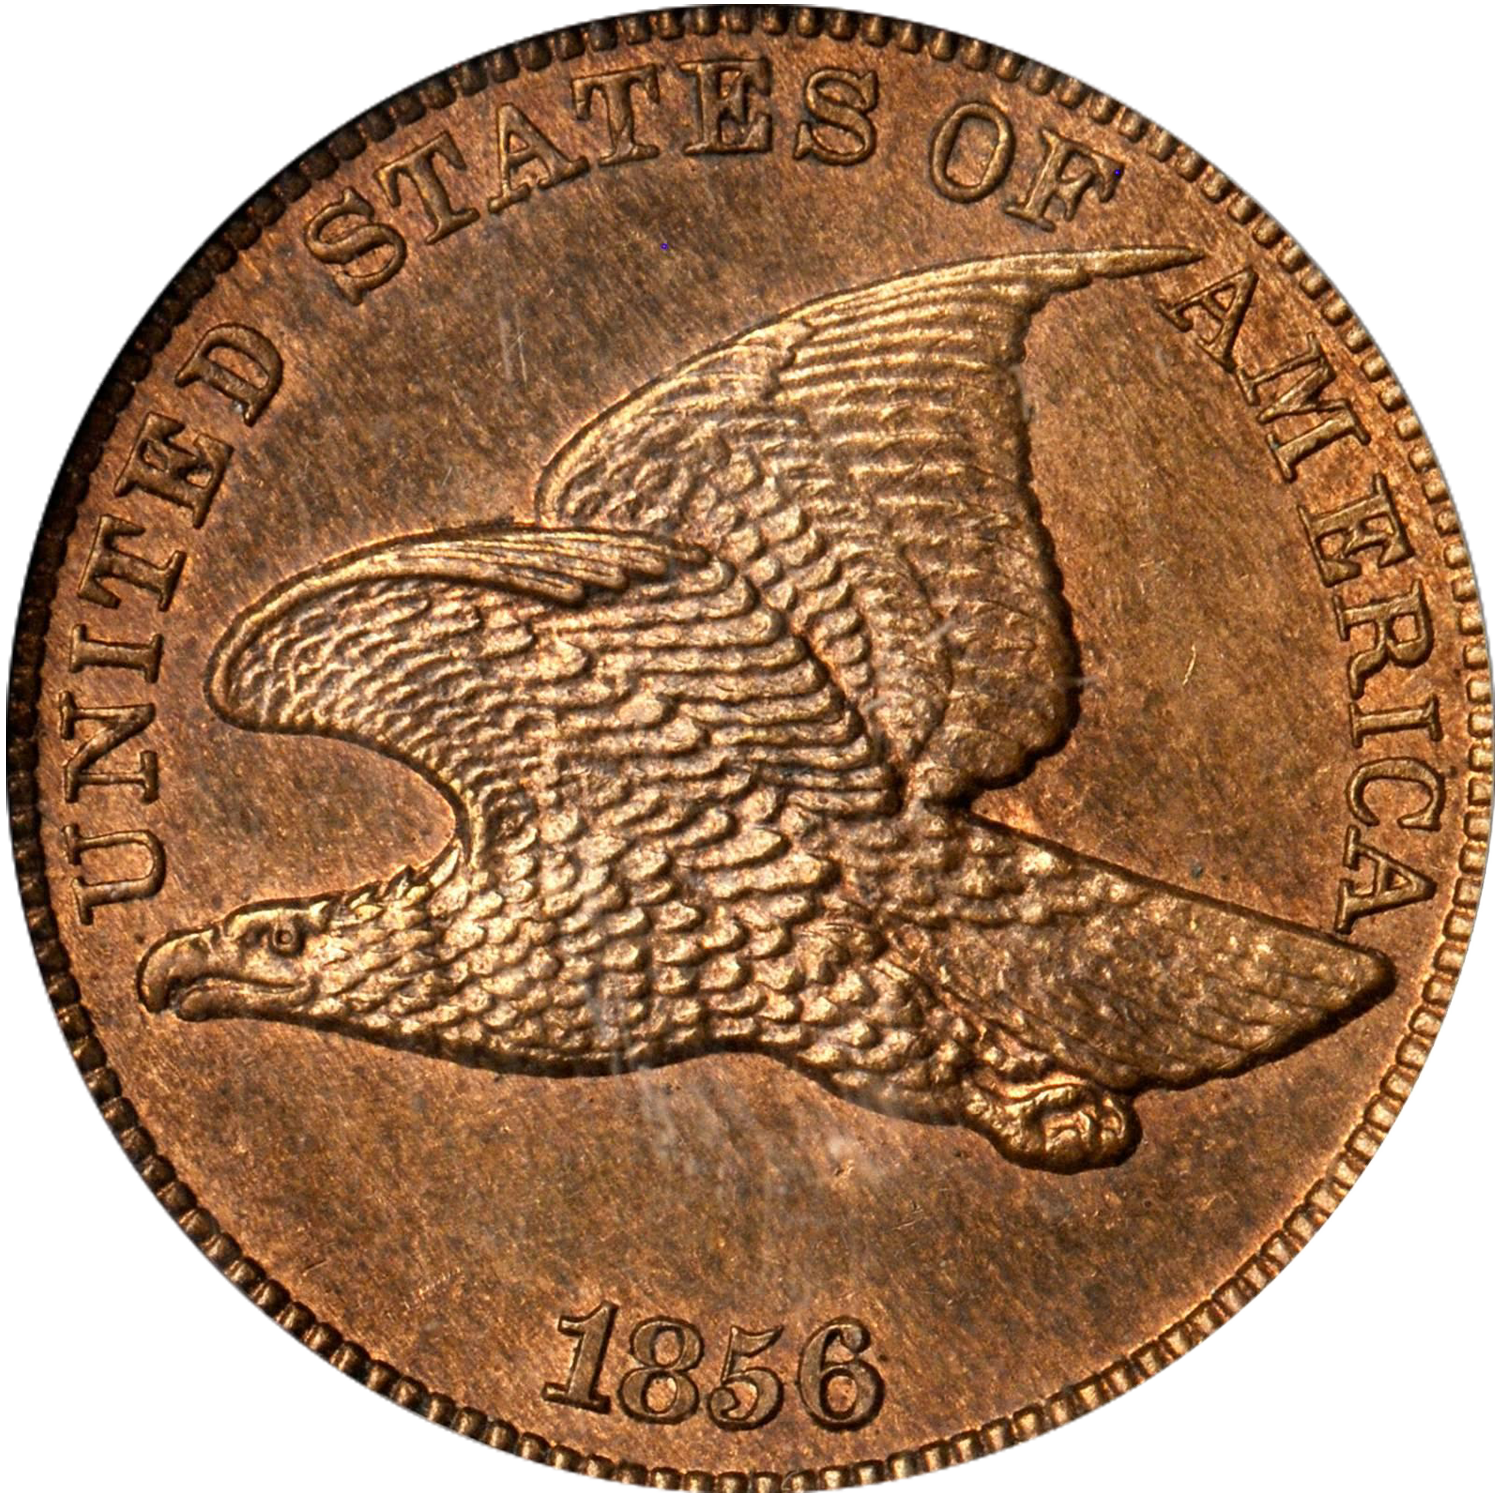 1856 one cent with eagle on front